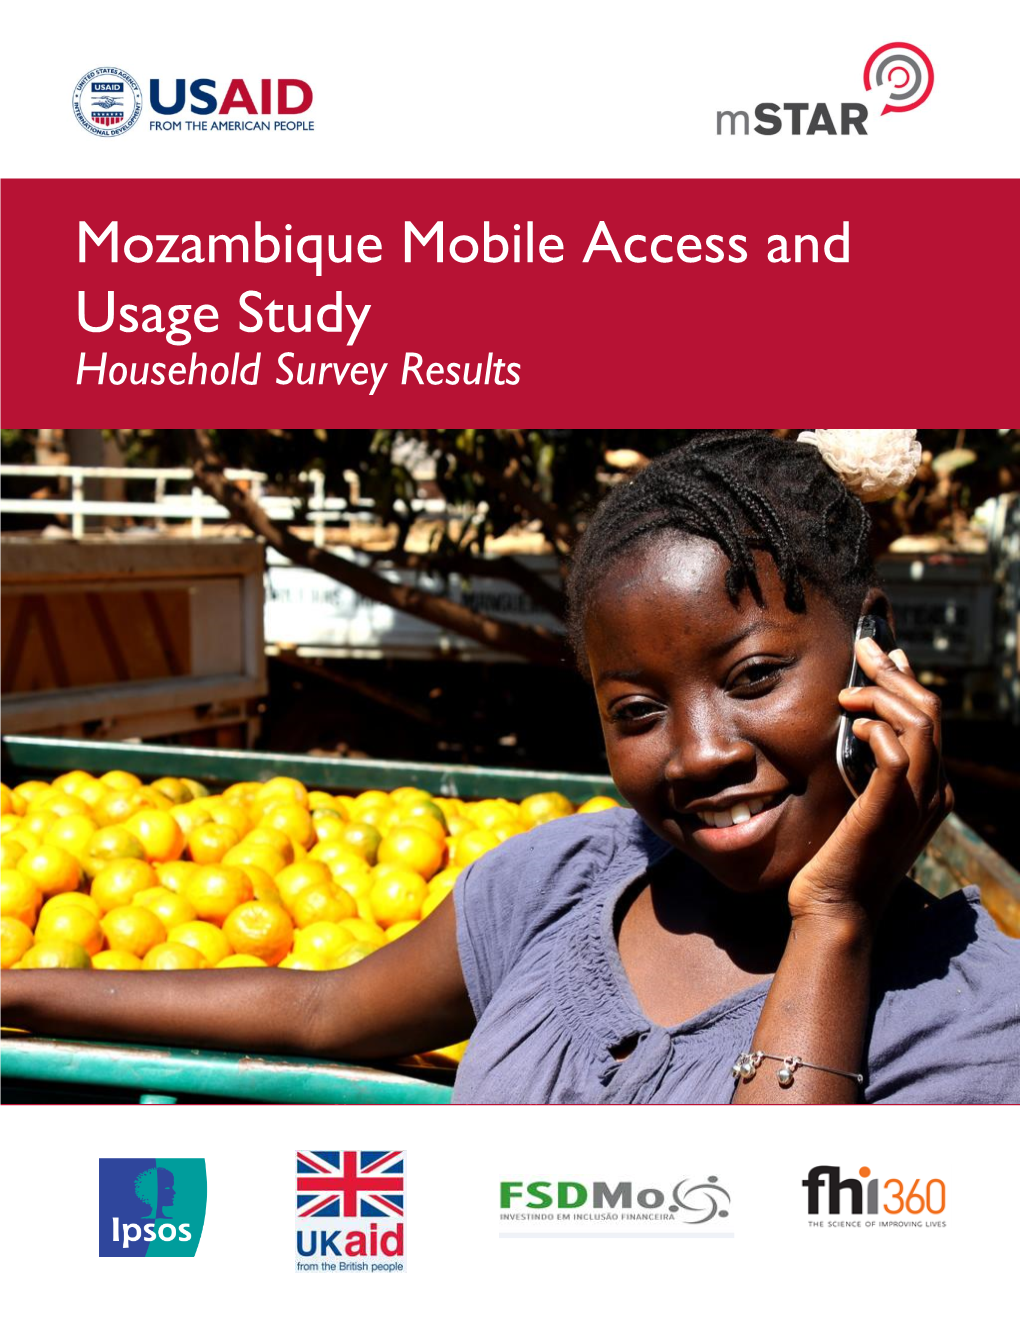 Mozambique Mobile Access and Usage Study Household Survey Results Mobile Acces and Usage Study in Mozambique